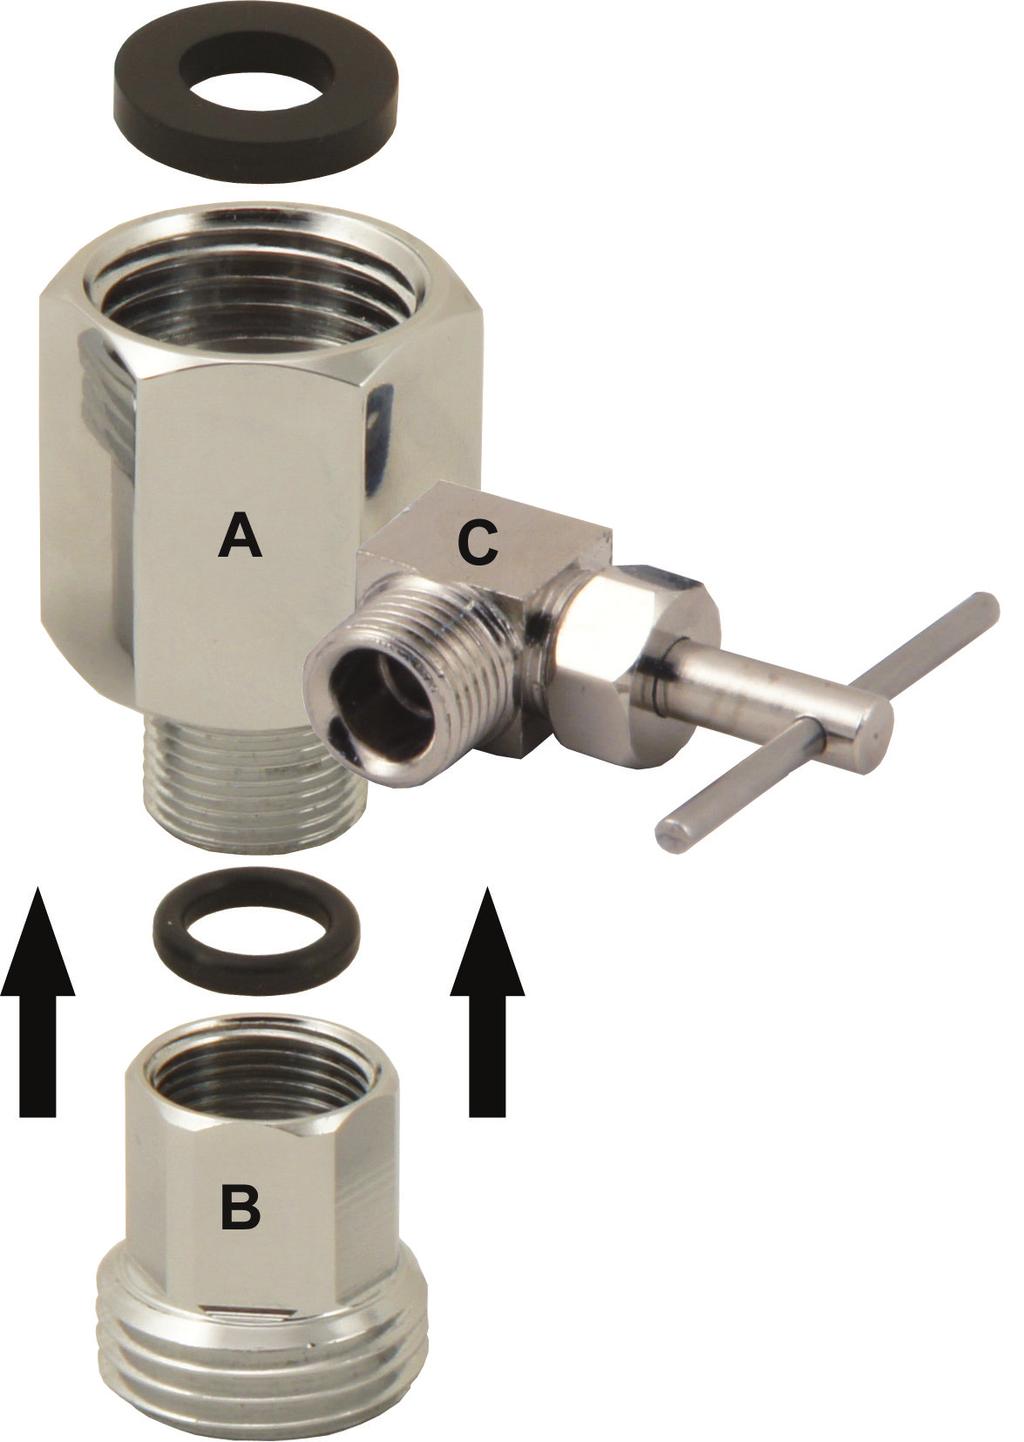 adapter (A). Fig. 5B - If your pipe has a 1/2 Connection.